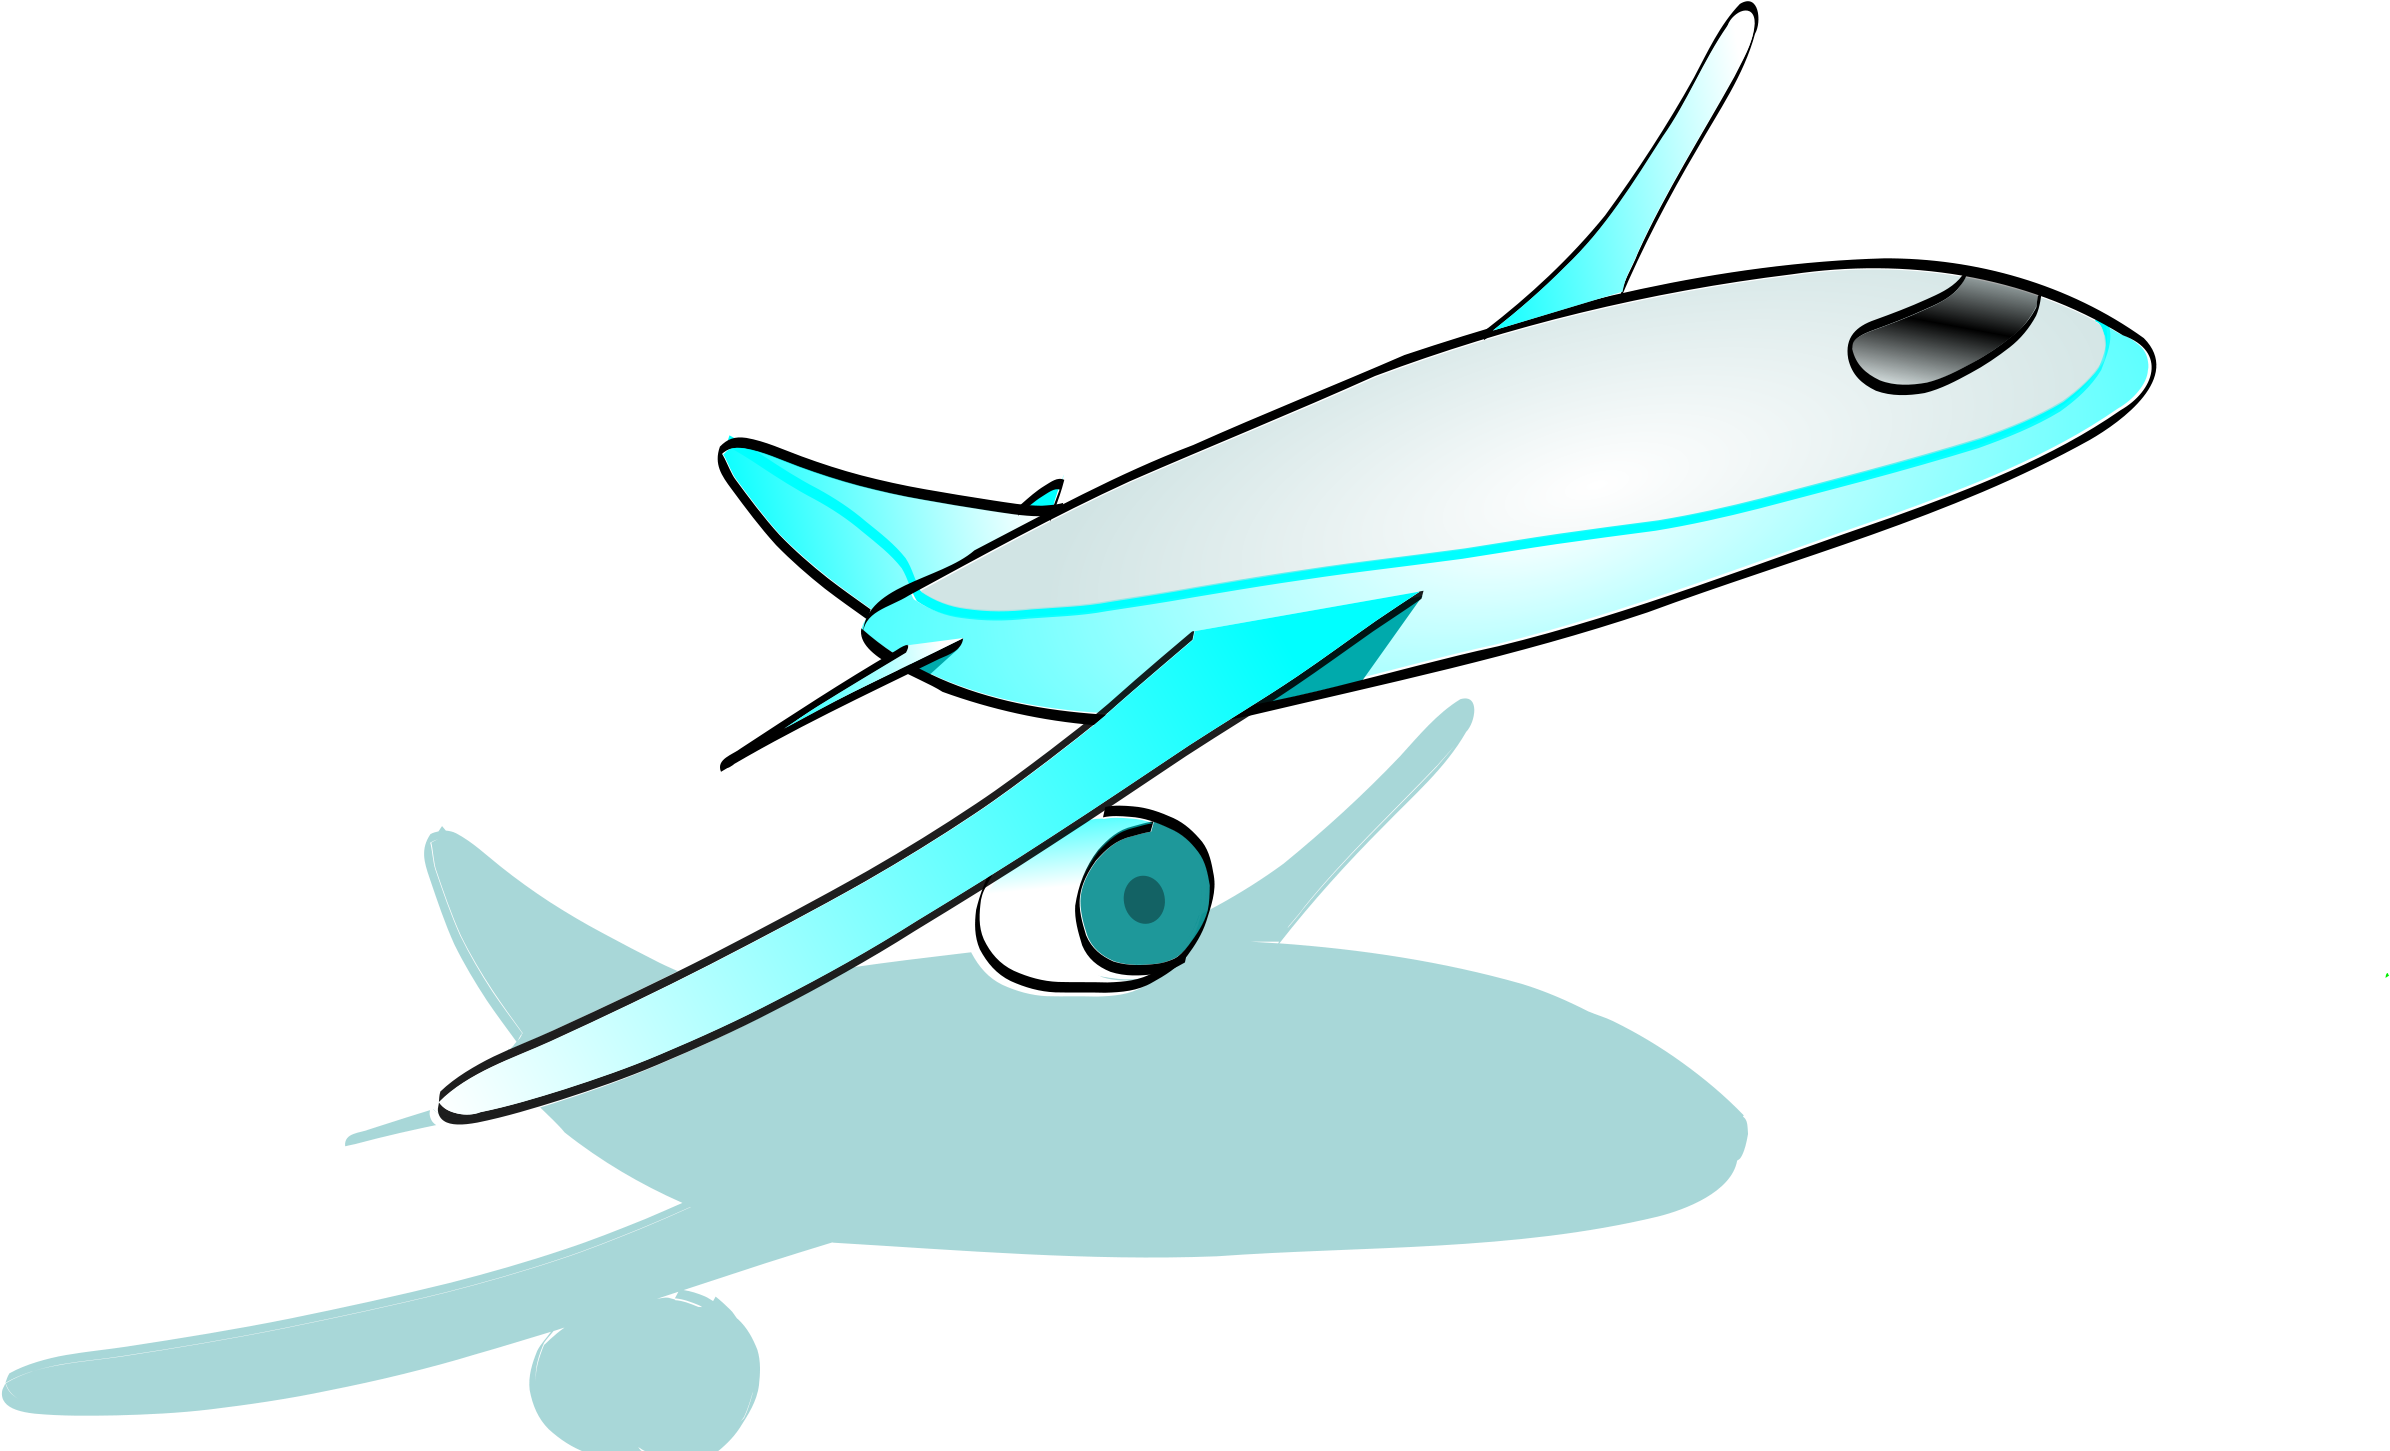 Download Jet Clipart Airplane Flying - Cartoon Plane Taking Off PNG Image  with No Background 